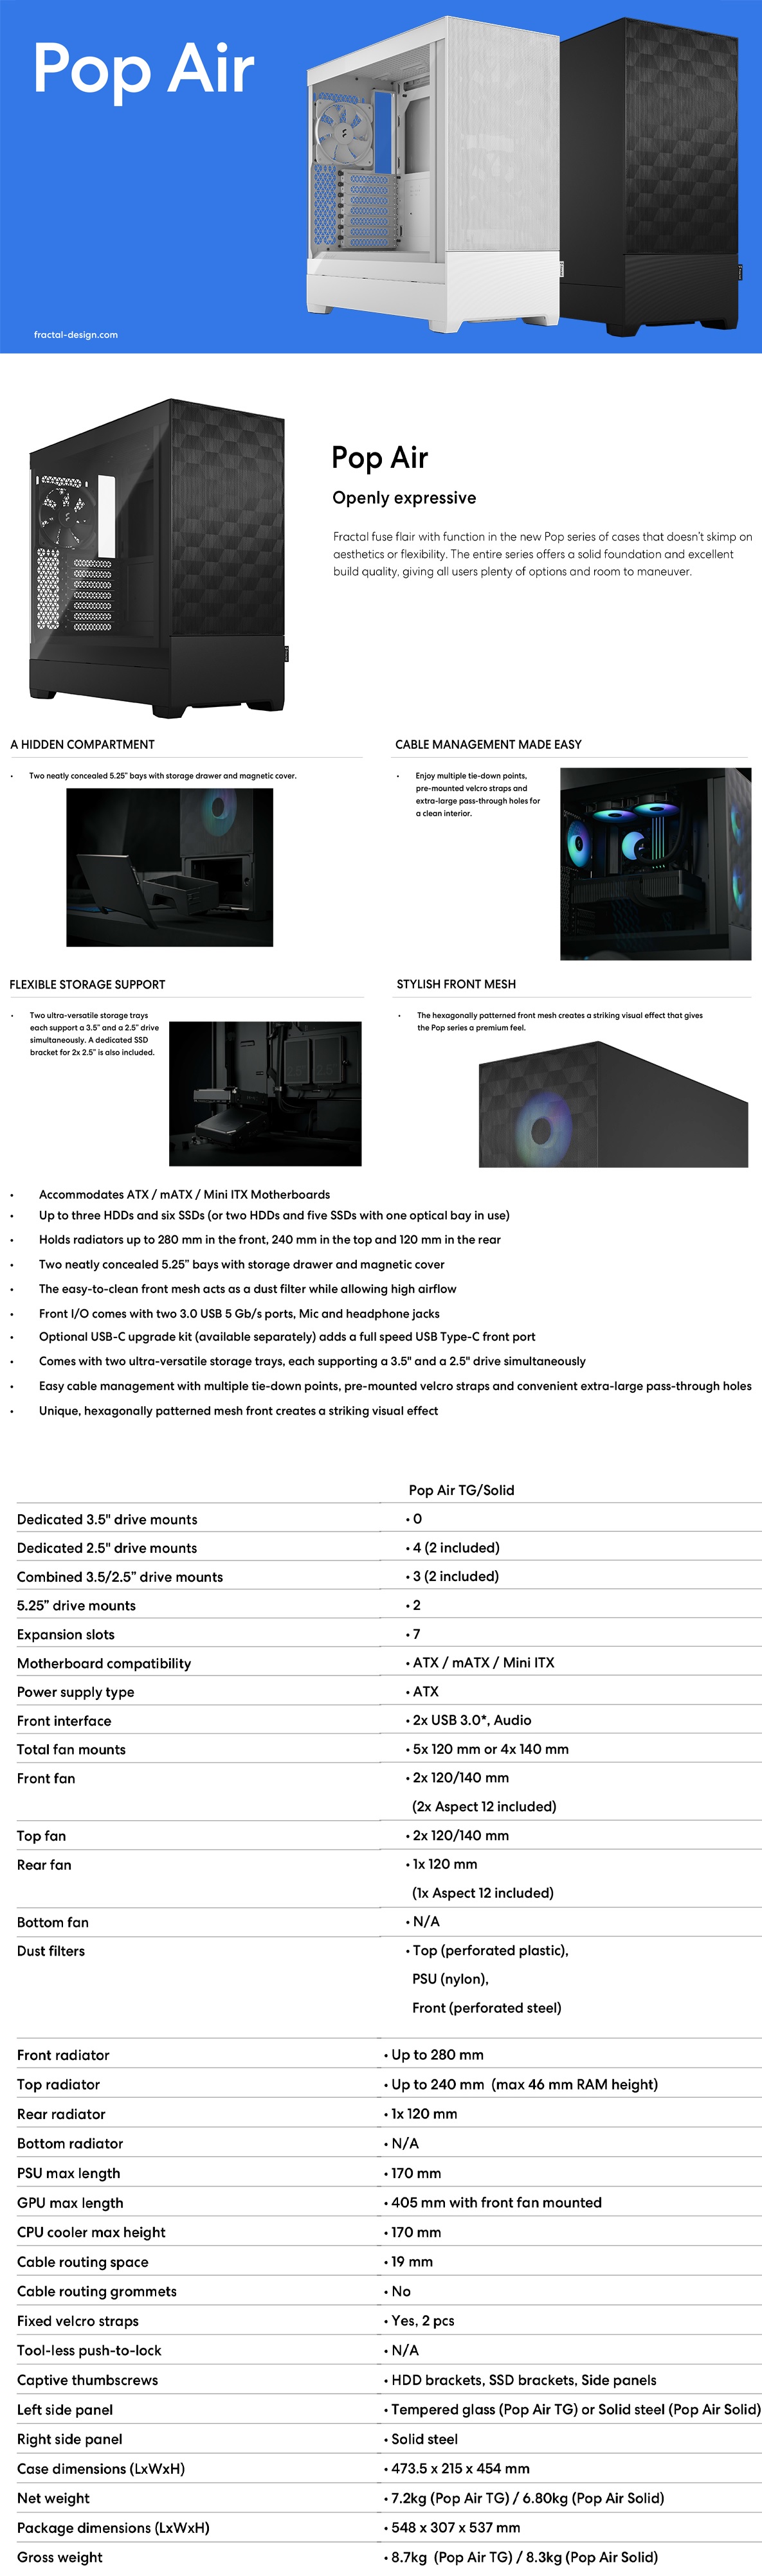 A large marketing image providing additional information about the product Fractal Design Pop Air TG Clear Tint Mid Tower Case - Black - Additional alt info not provided